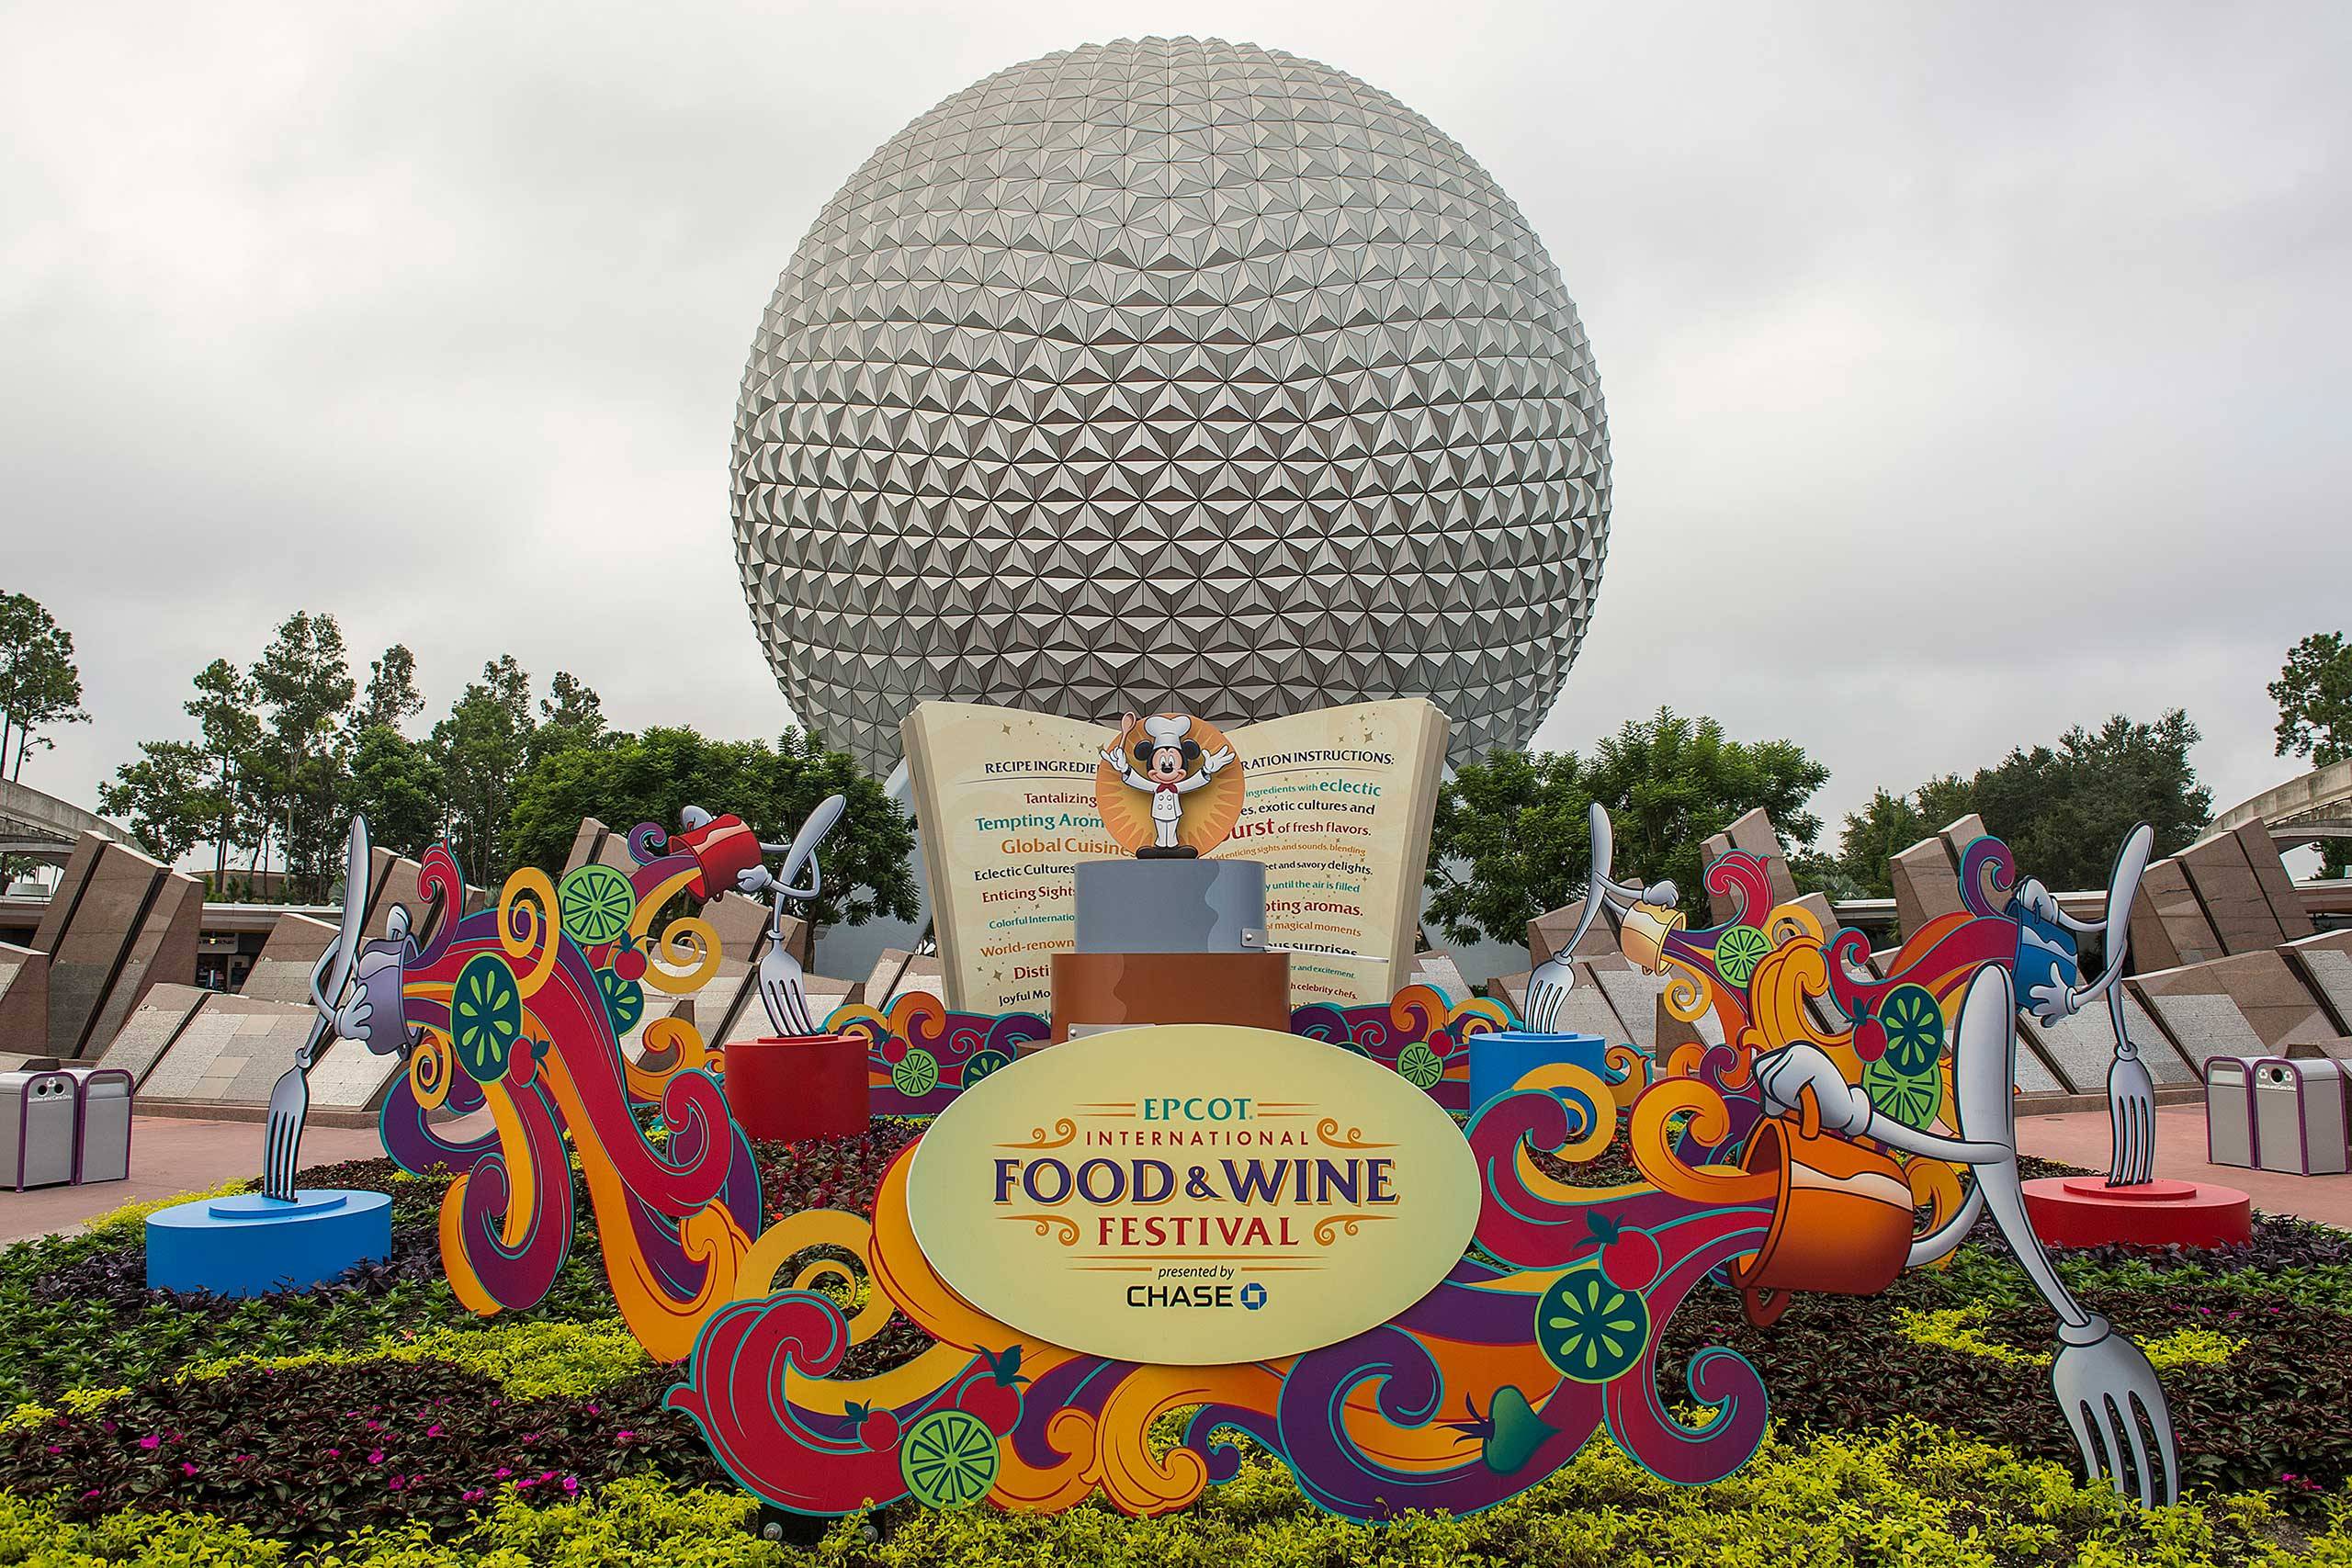 New VIP series tour - The Ultimate Day at Epcot's International Food and Wine Festival